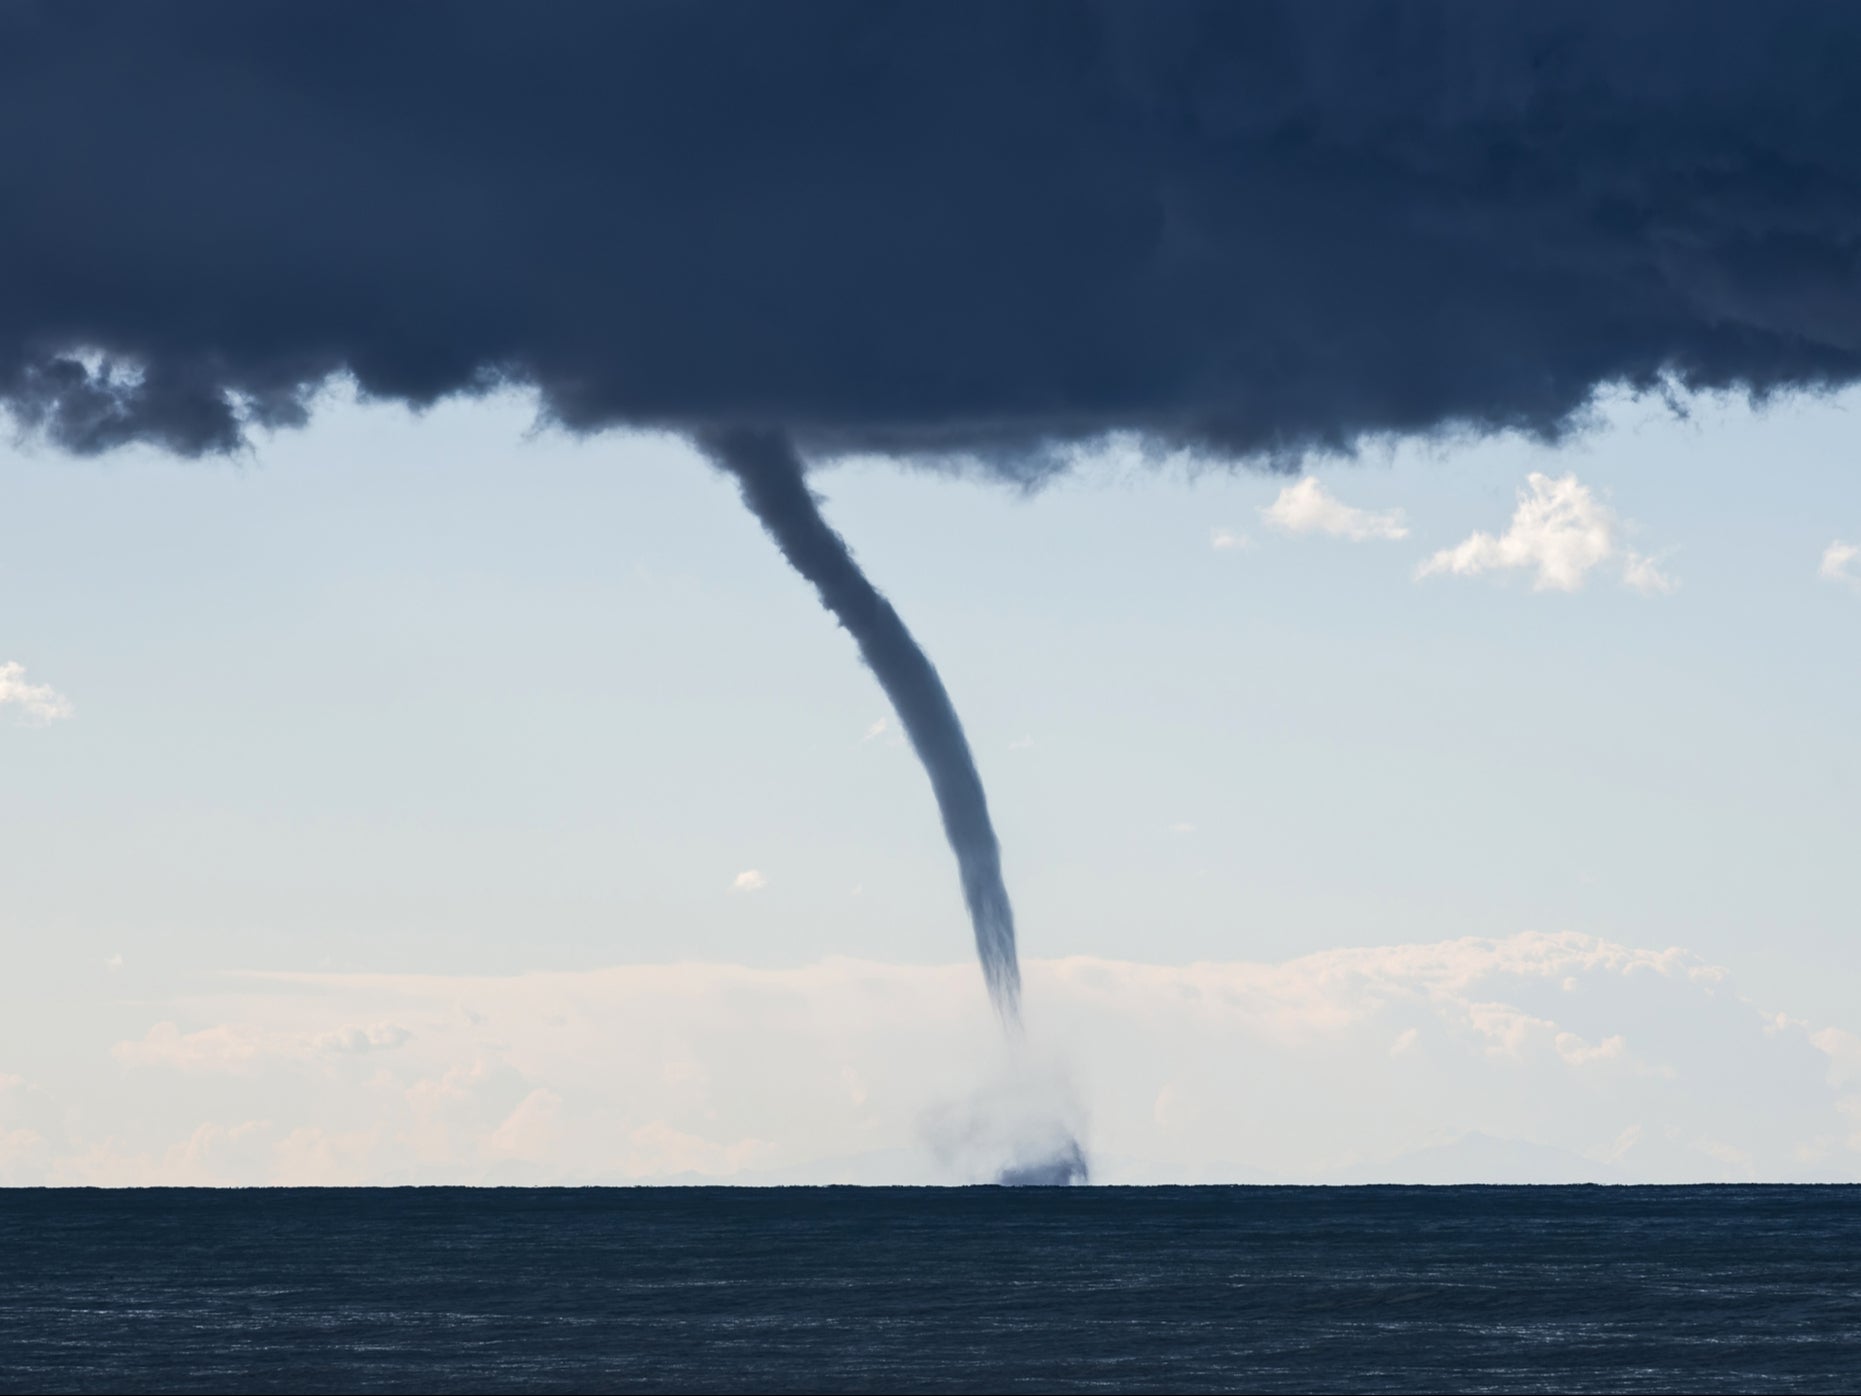 A tornado over the Mediterranean Sea. The climate crisis is warming oceans, making extreme weather more likely